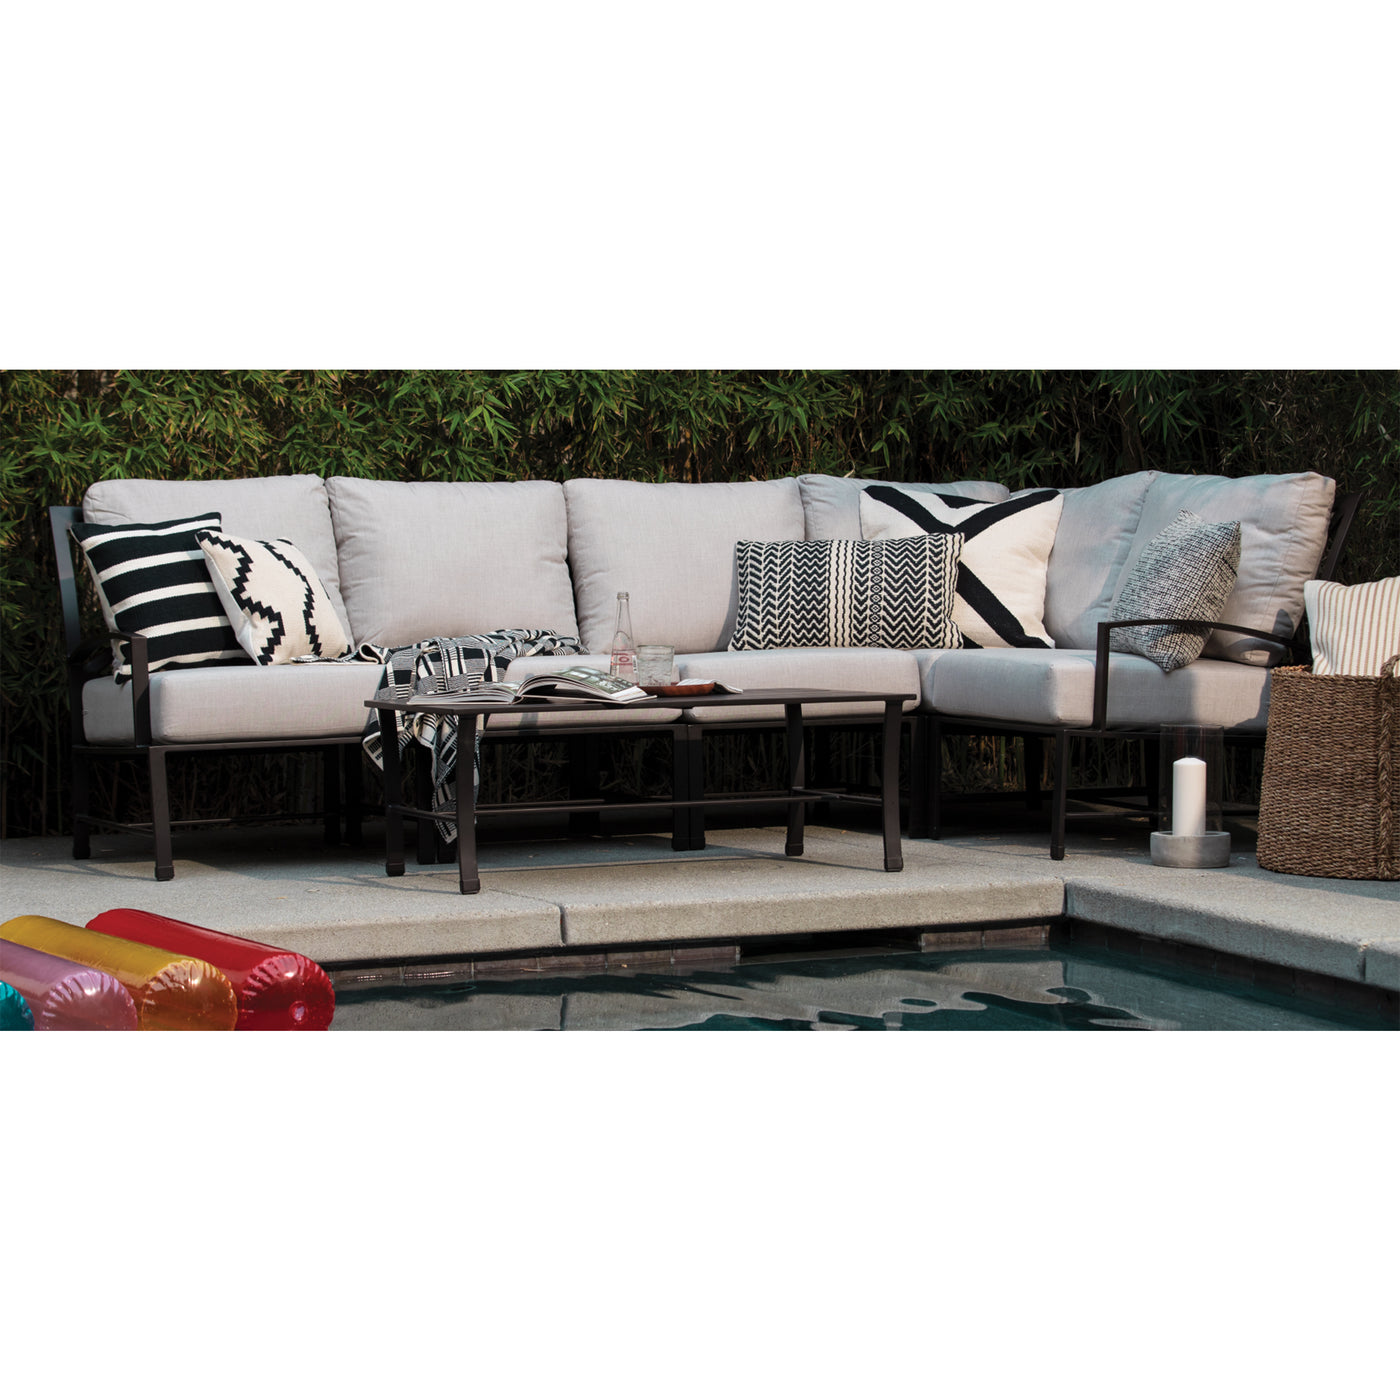  Yardbird Colby Outdoor Large Sectional Set Outdoor Furniture